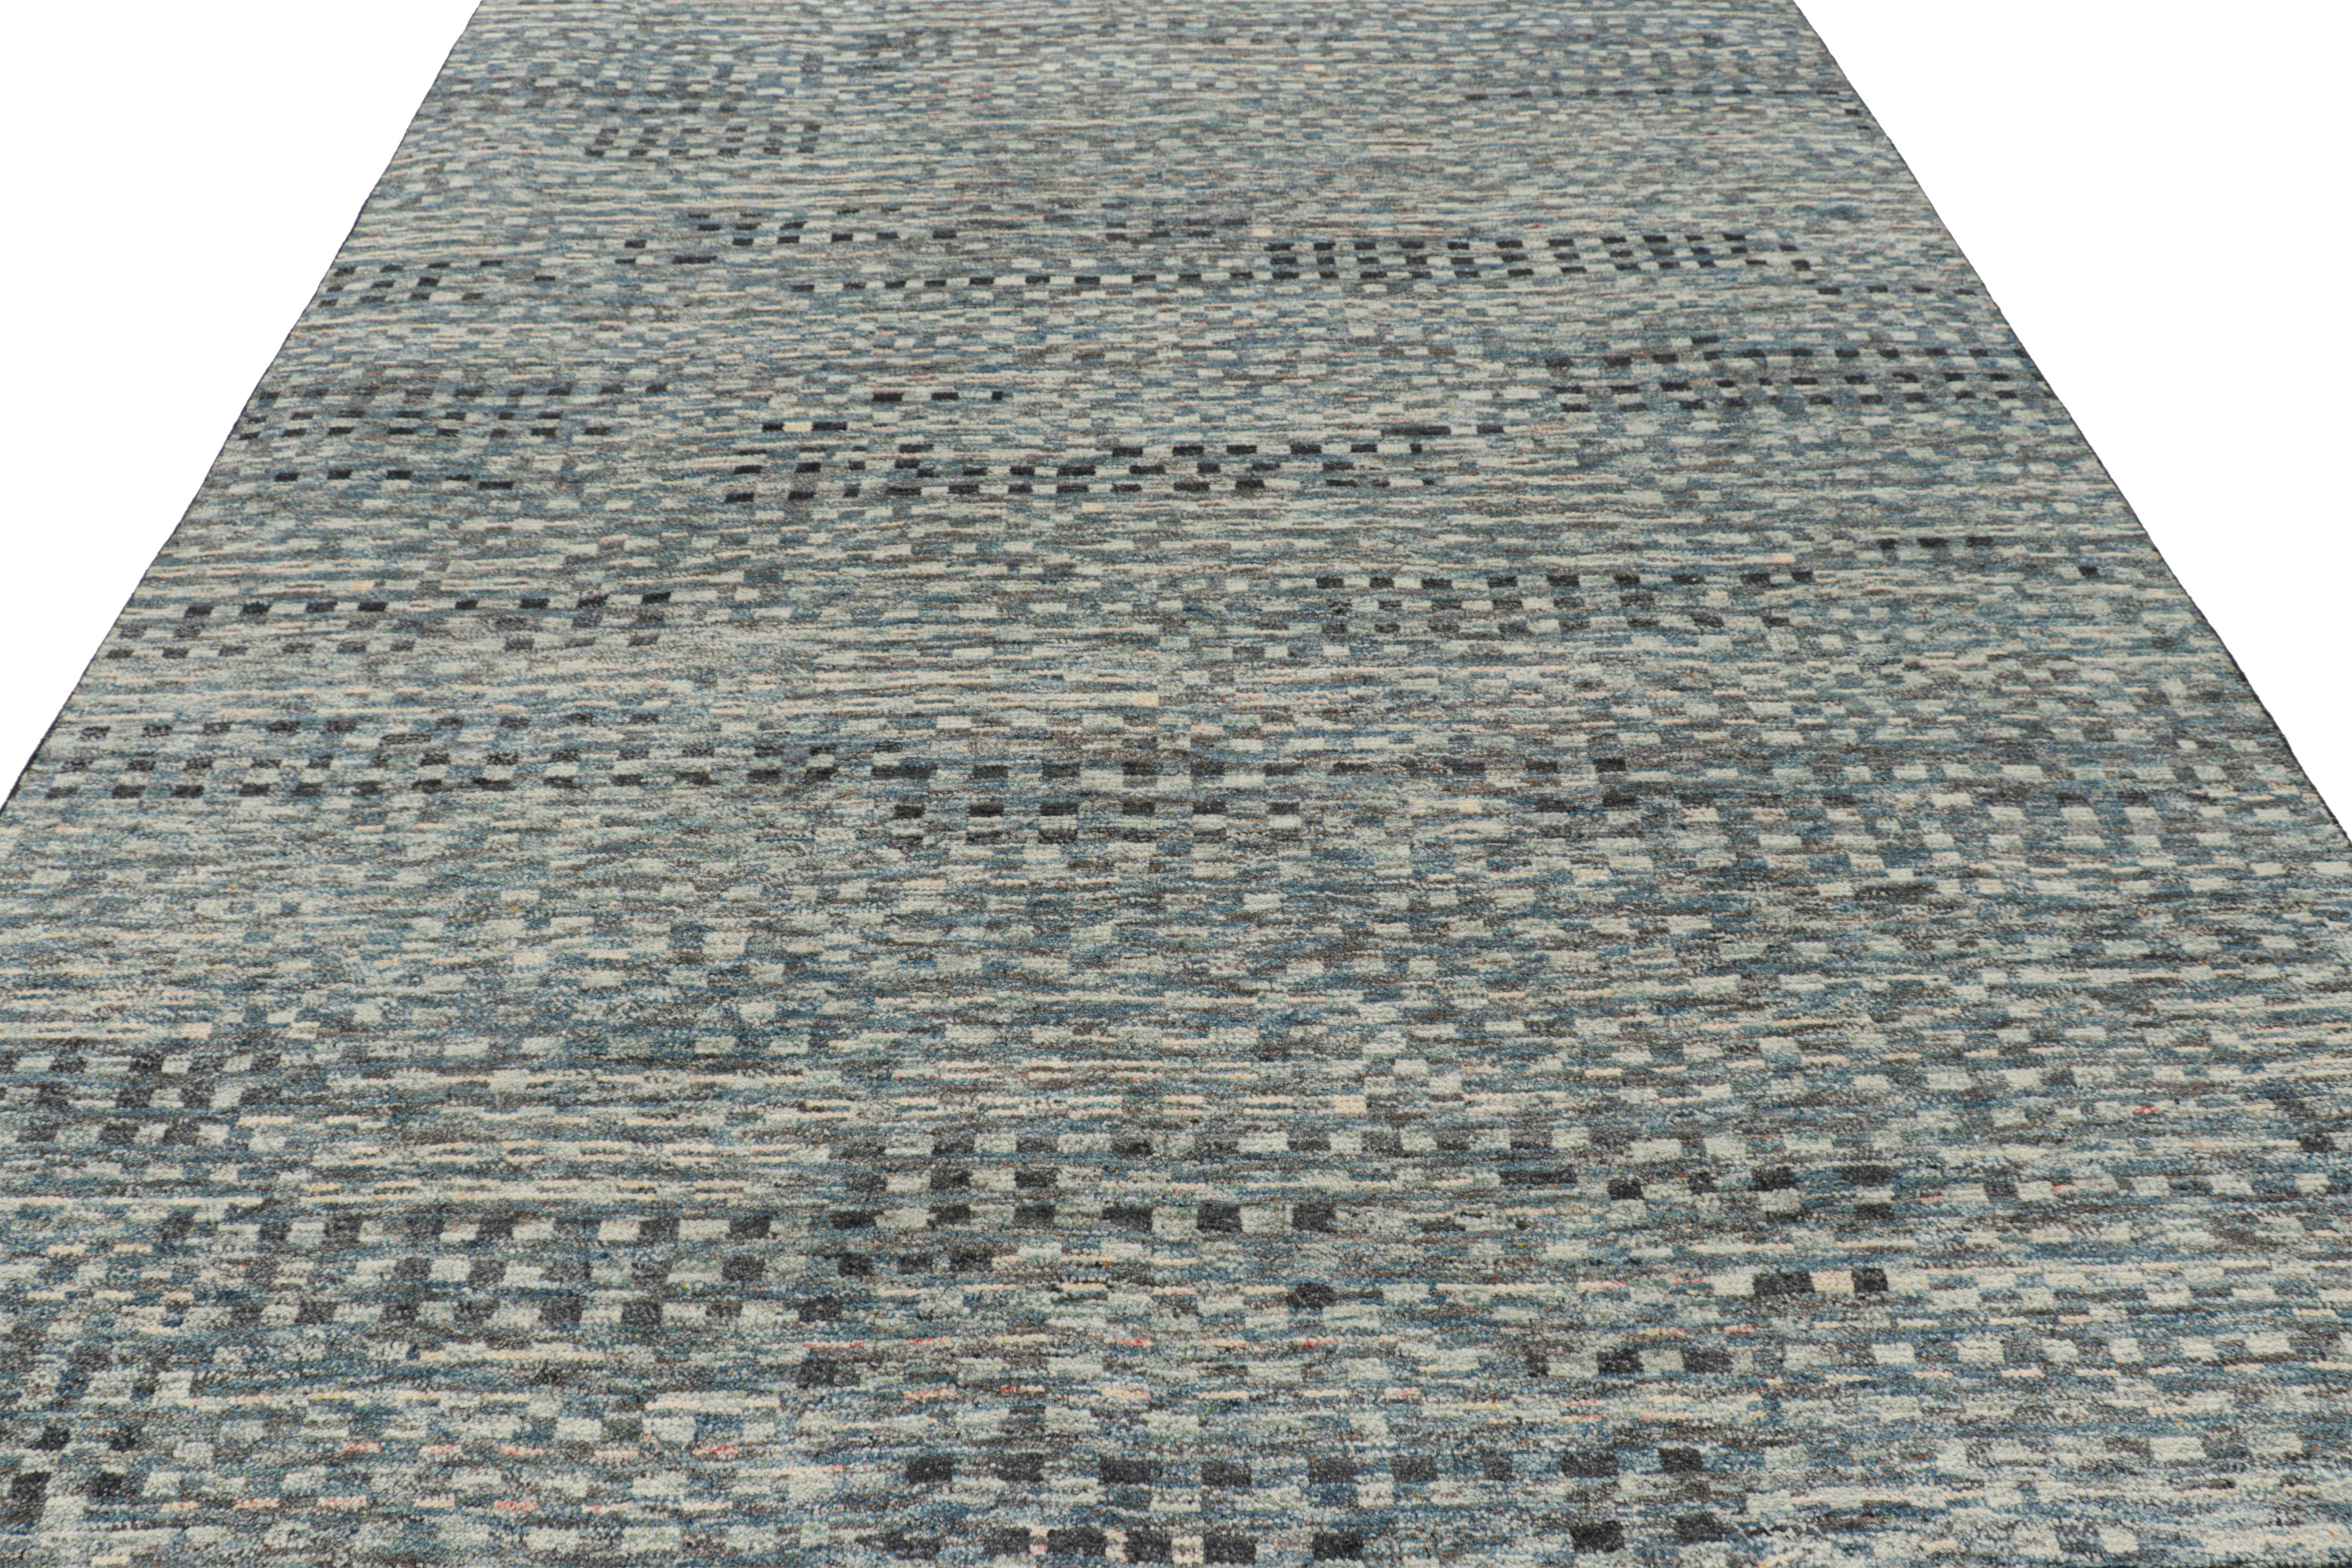 Hand-Knotted Rug & Kilim’s Moroccan Style Rug in Blue, Gray and White Geometric Patterns For Sale